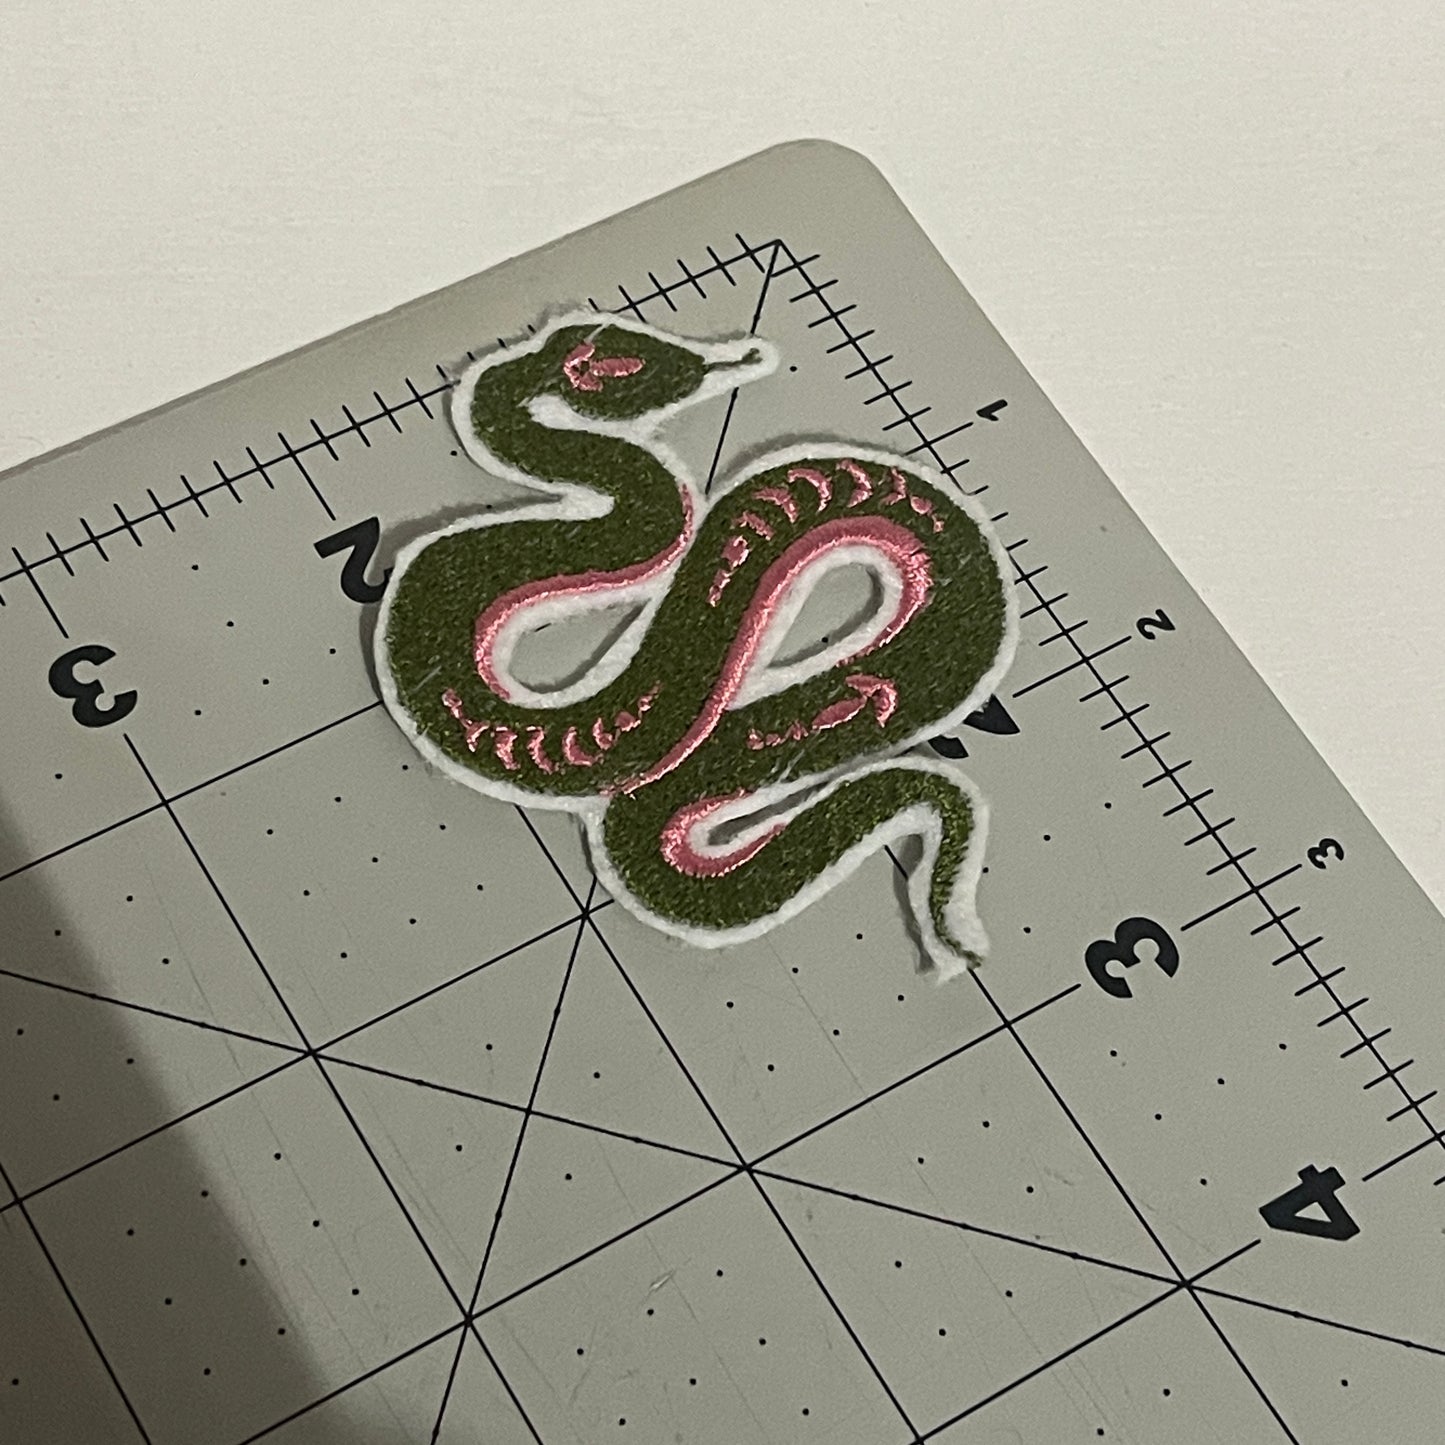 Boho Snake Iron on embroidered patch